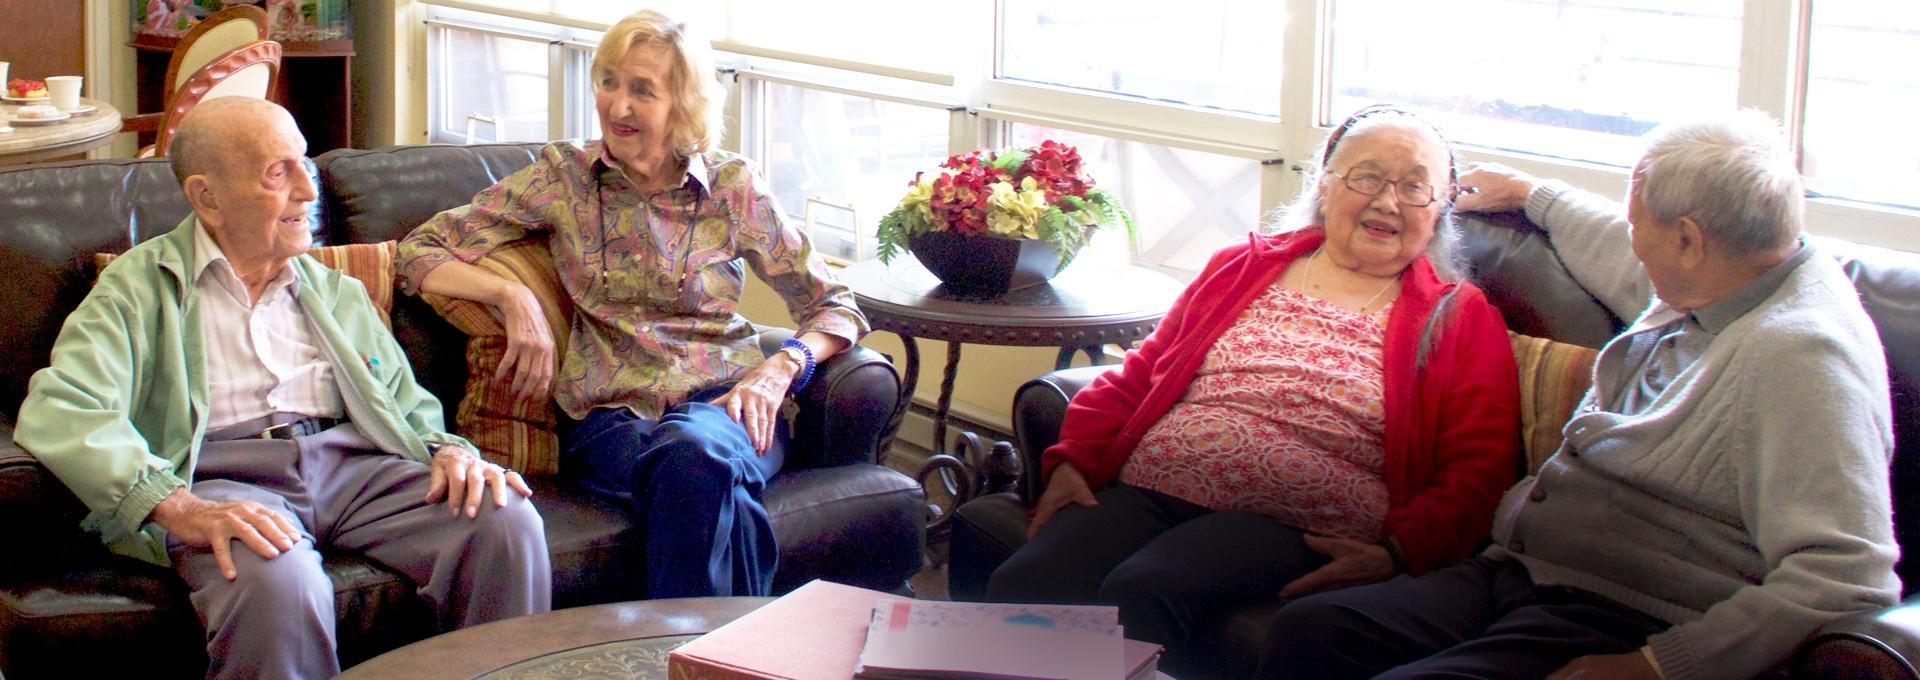 Three elderly people relaxing together